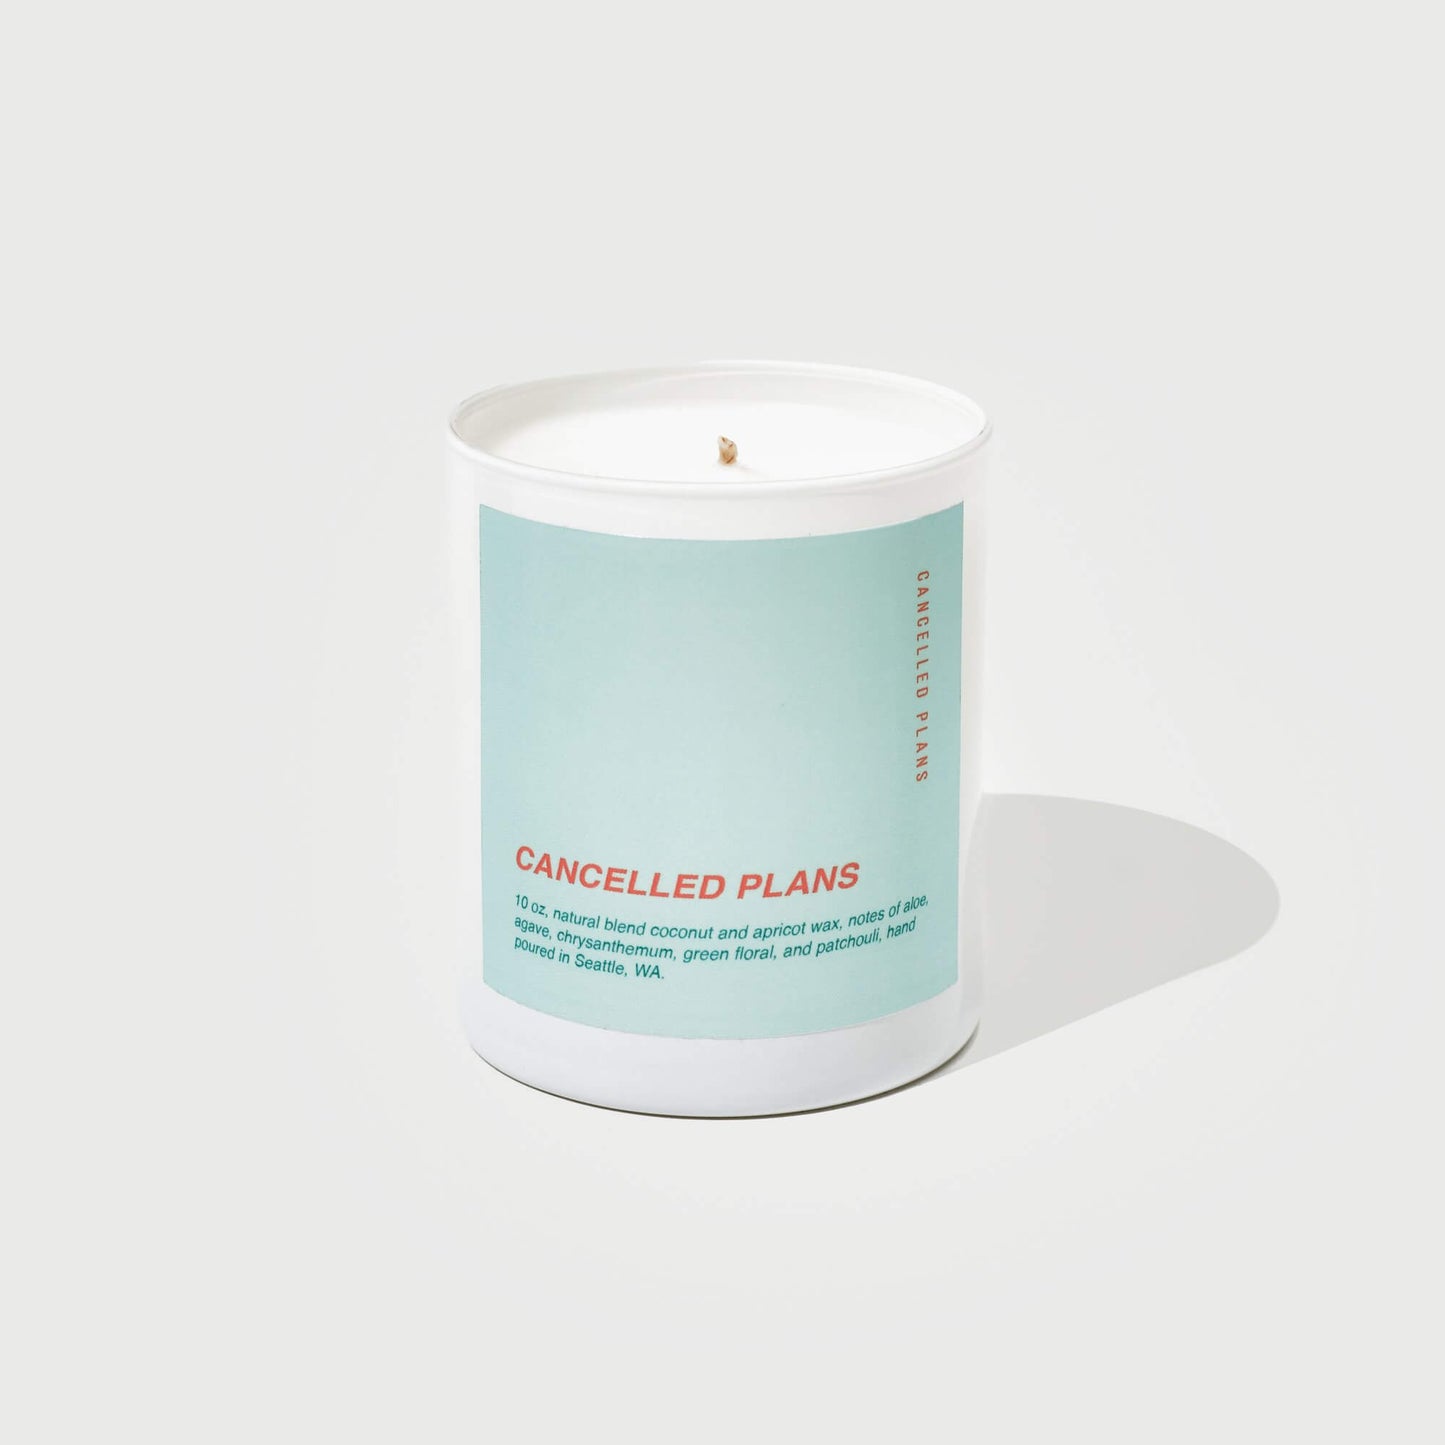 Cancelled Plans Cancelled Plans Scented Candle - Osmology Scented Candles & Home Fragrance